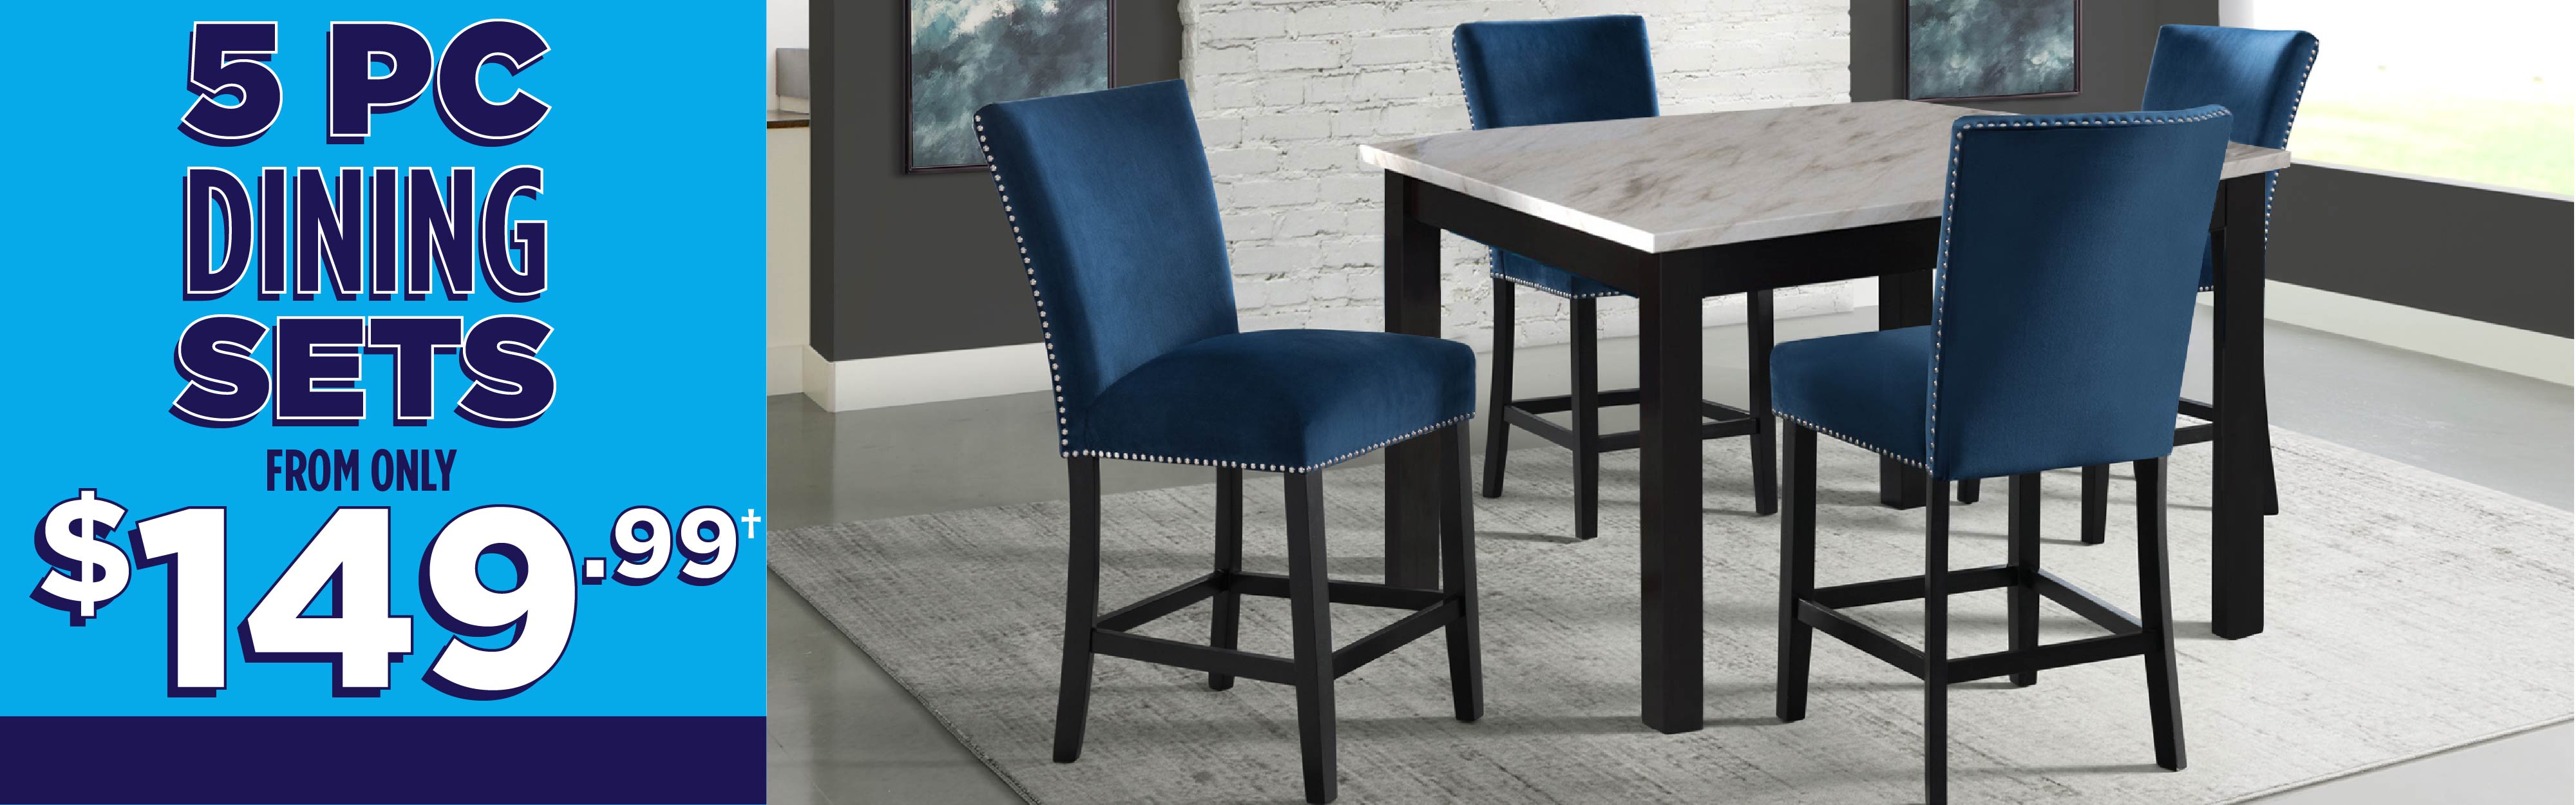 5-pc. Dining Sets from only $149.99